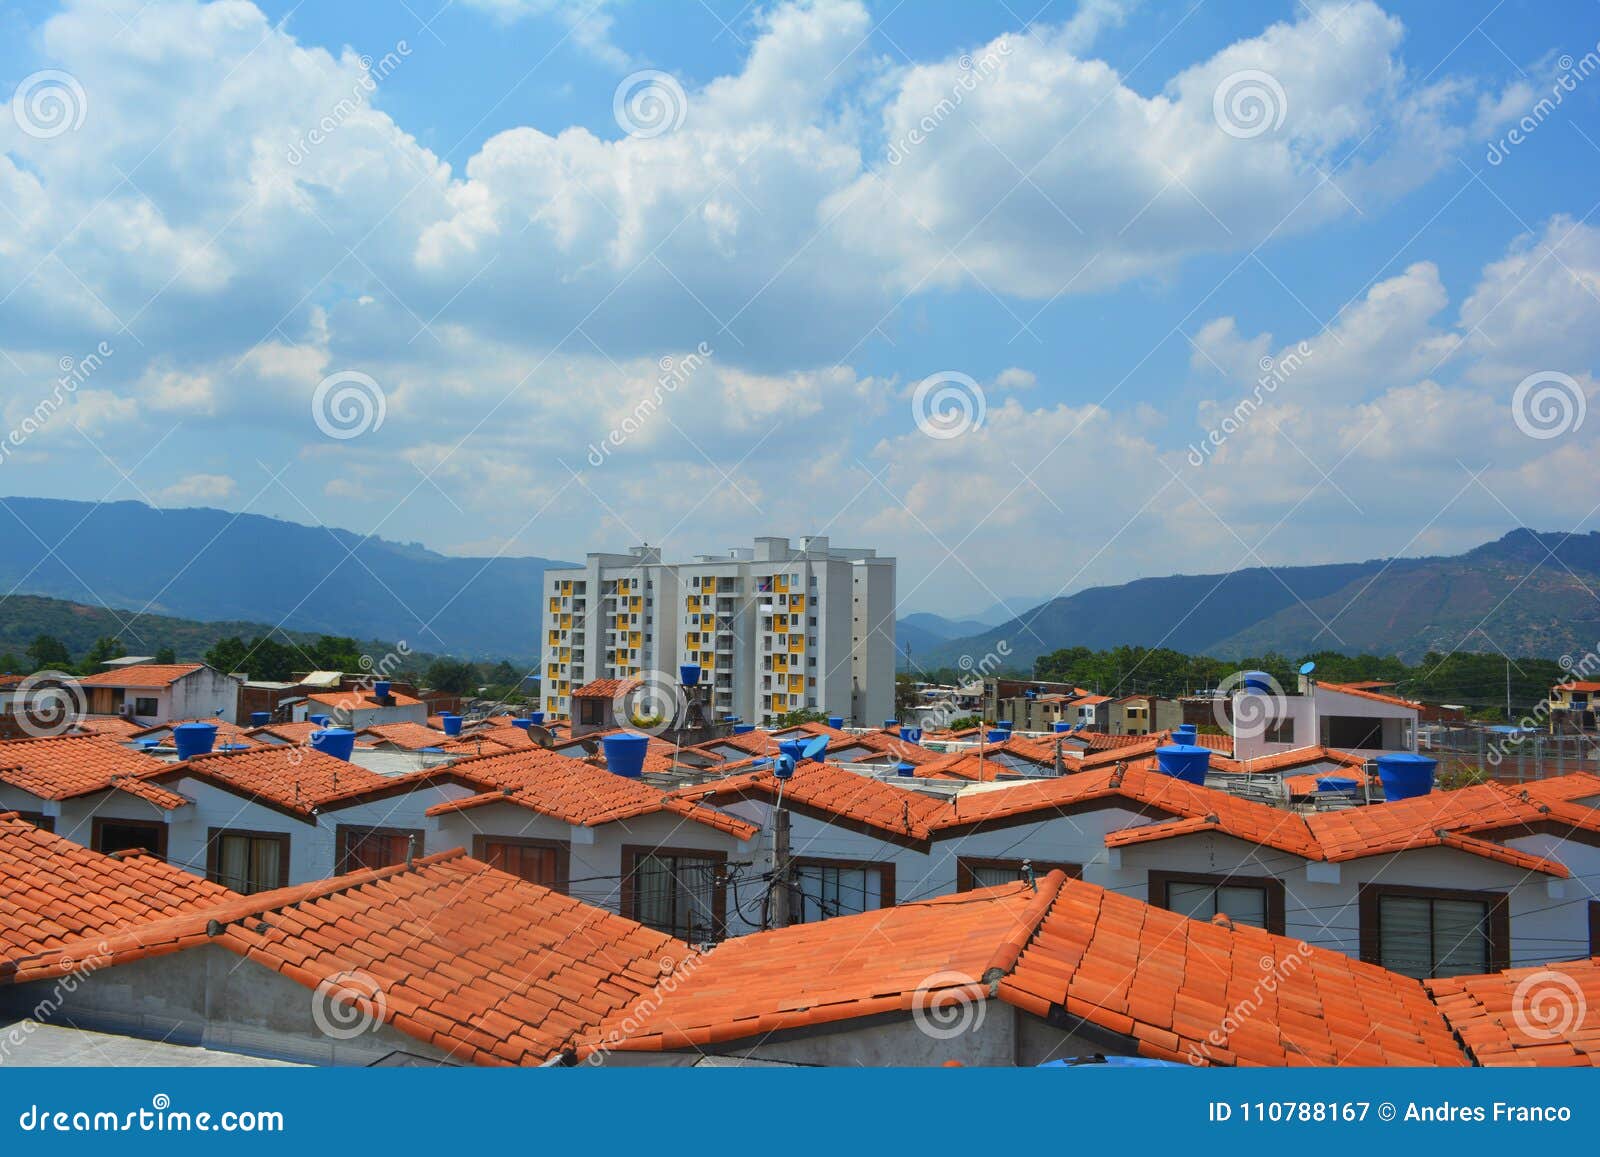 a landscape of some houses seen from the roof with a blue sky in the background